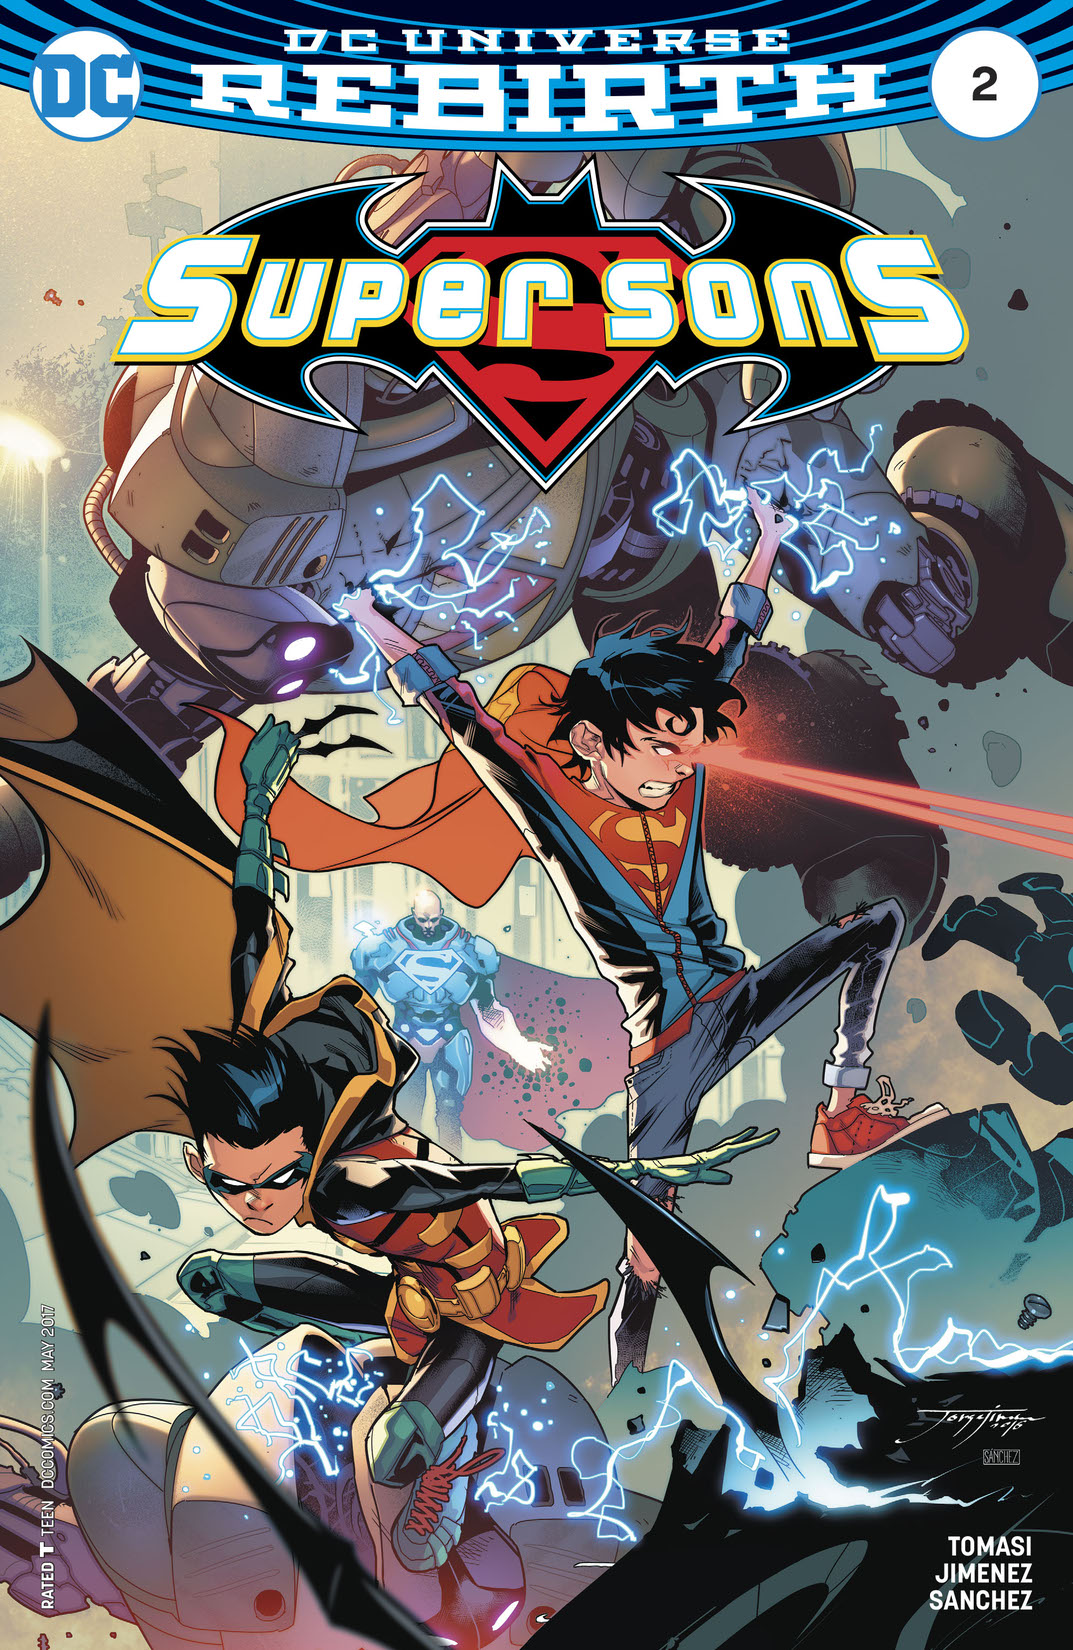 Super Sons (2017-) #2 preview images